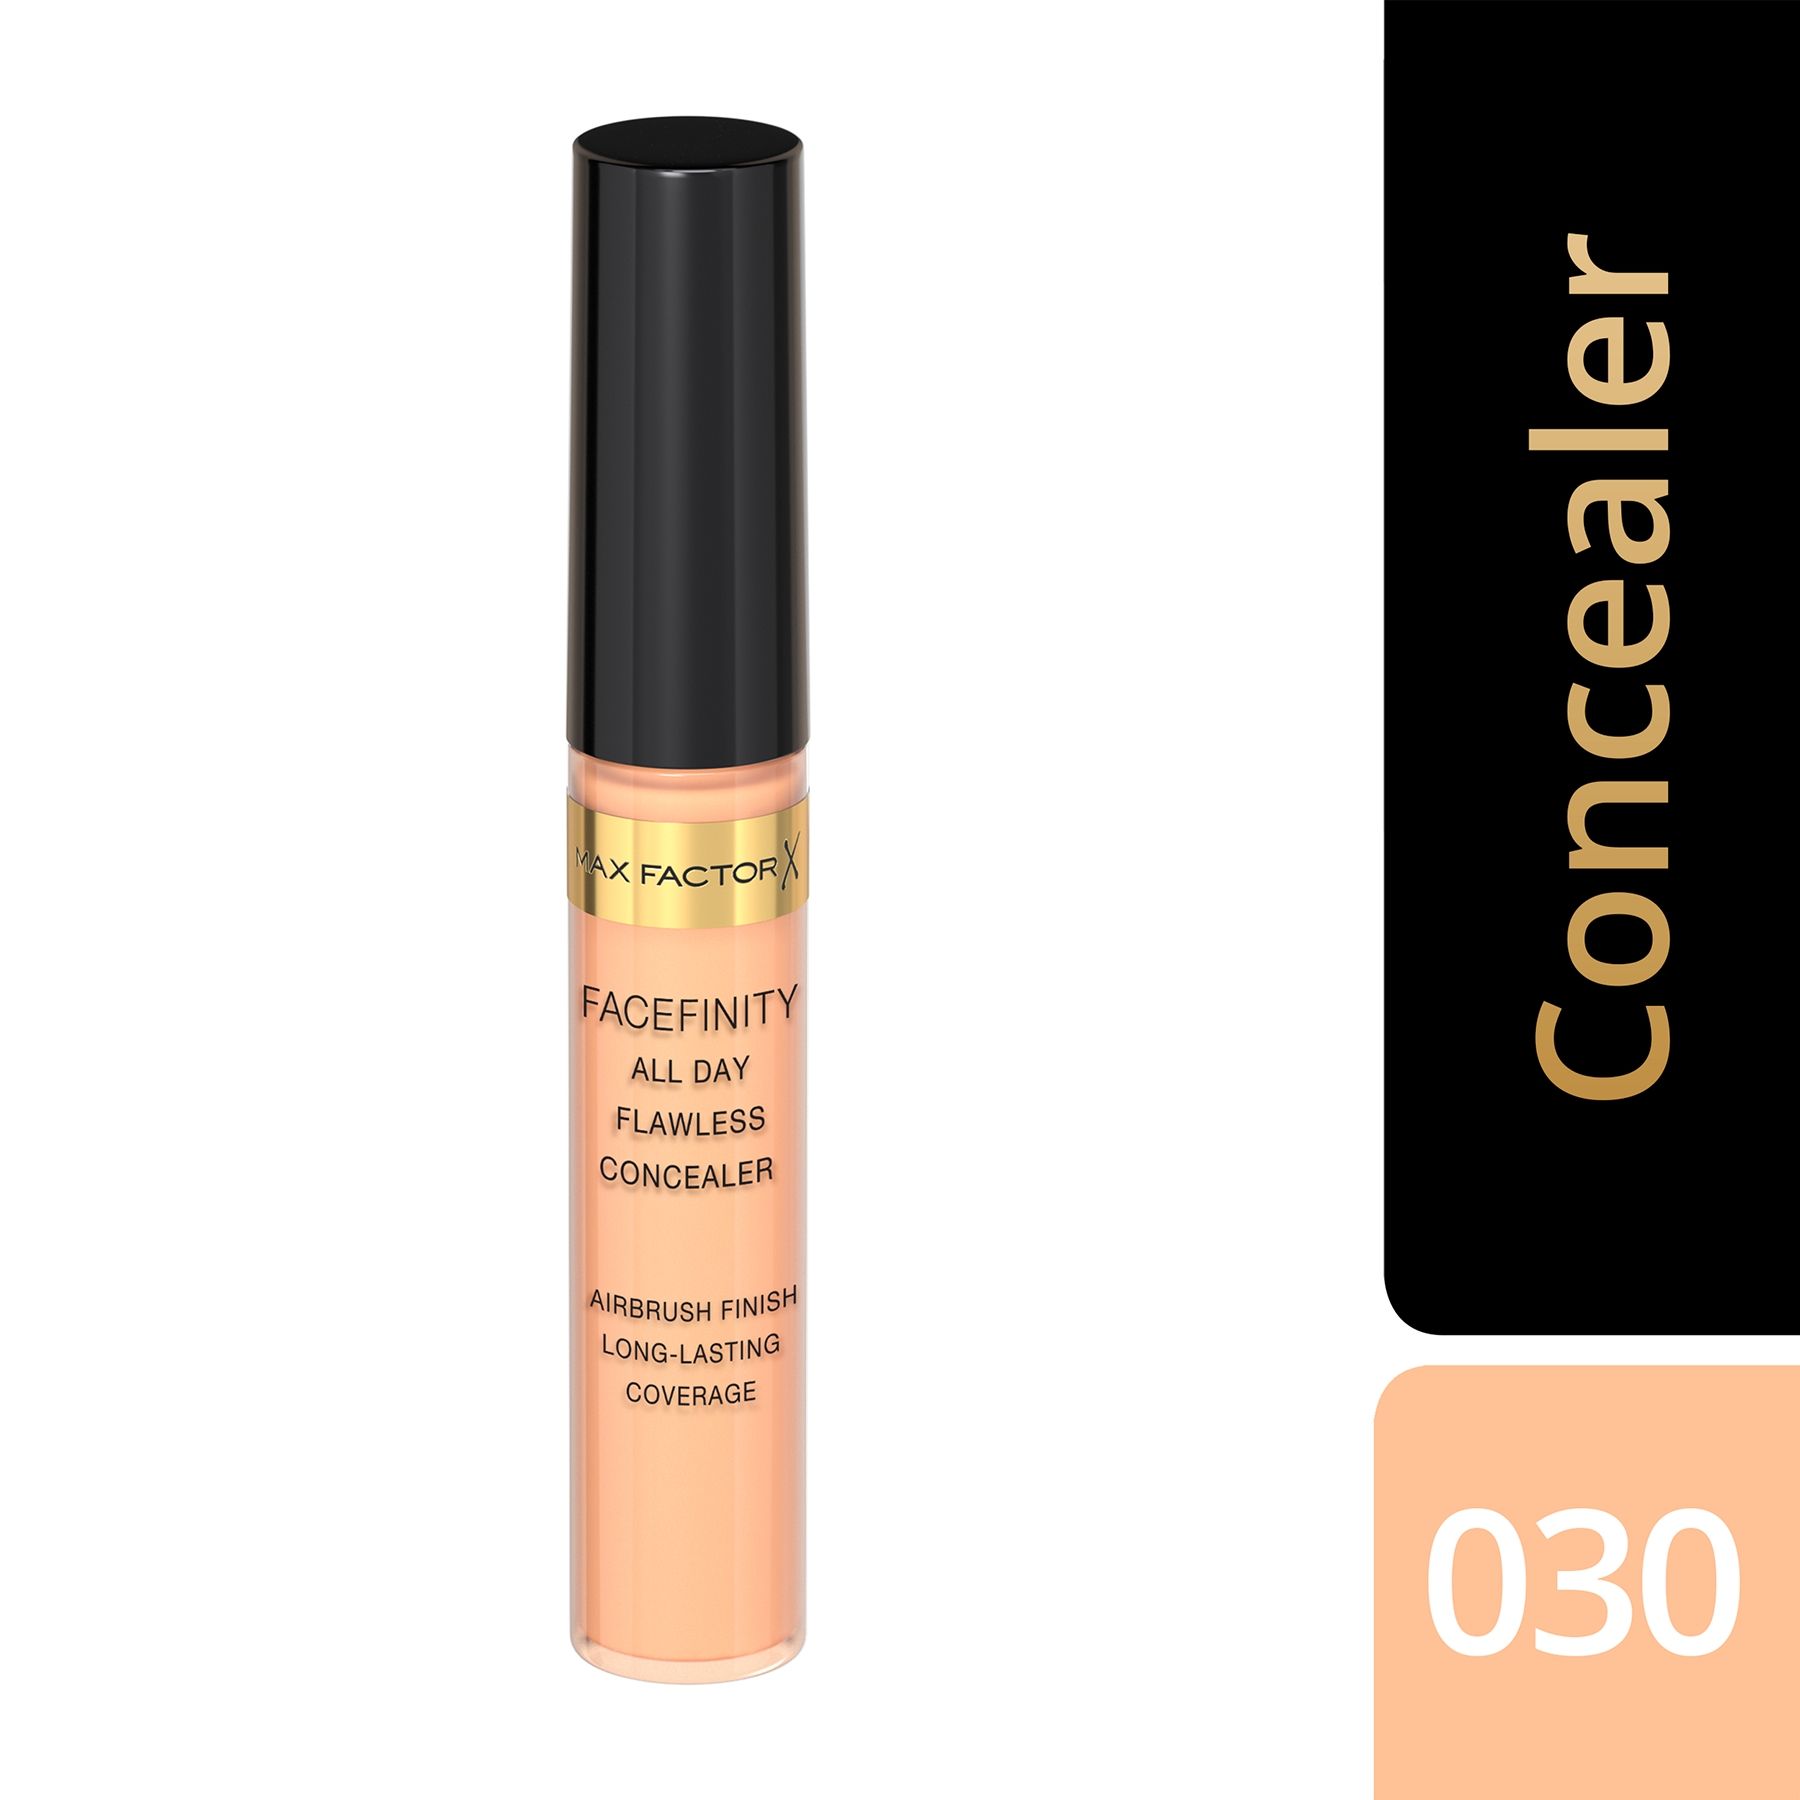 Buy Max Factor Facefinity Day Concealer Online All